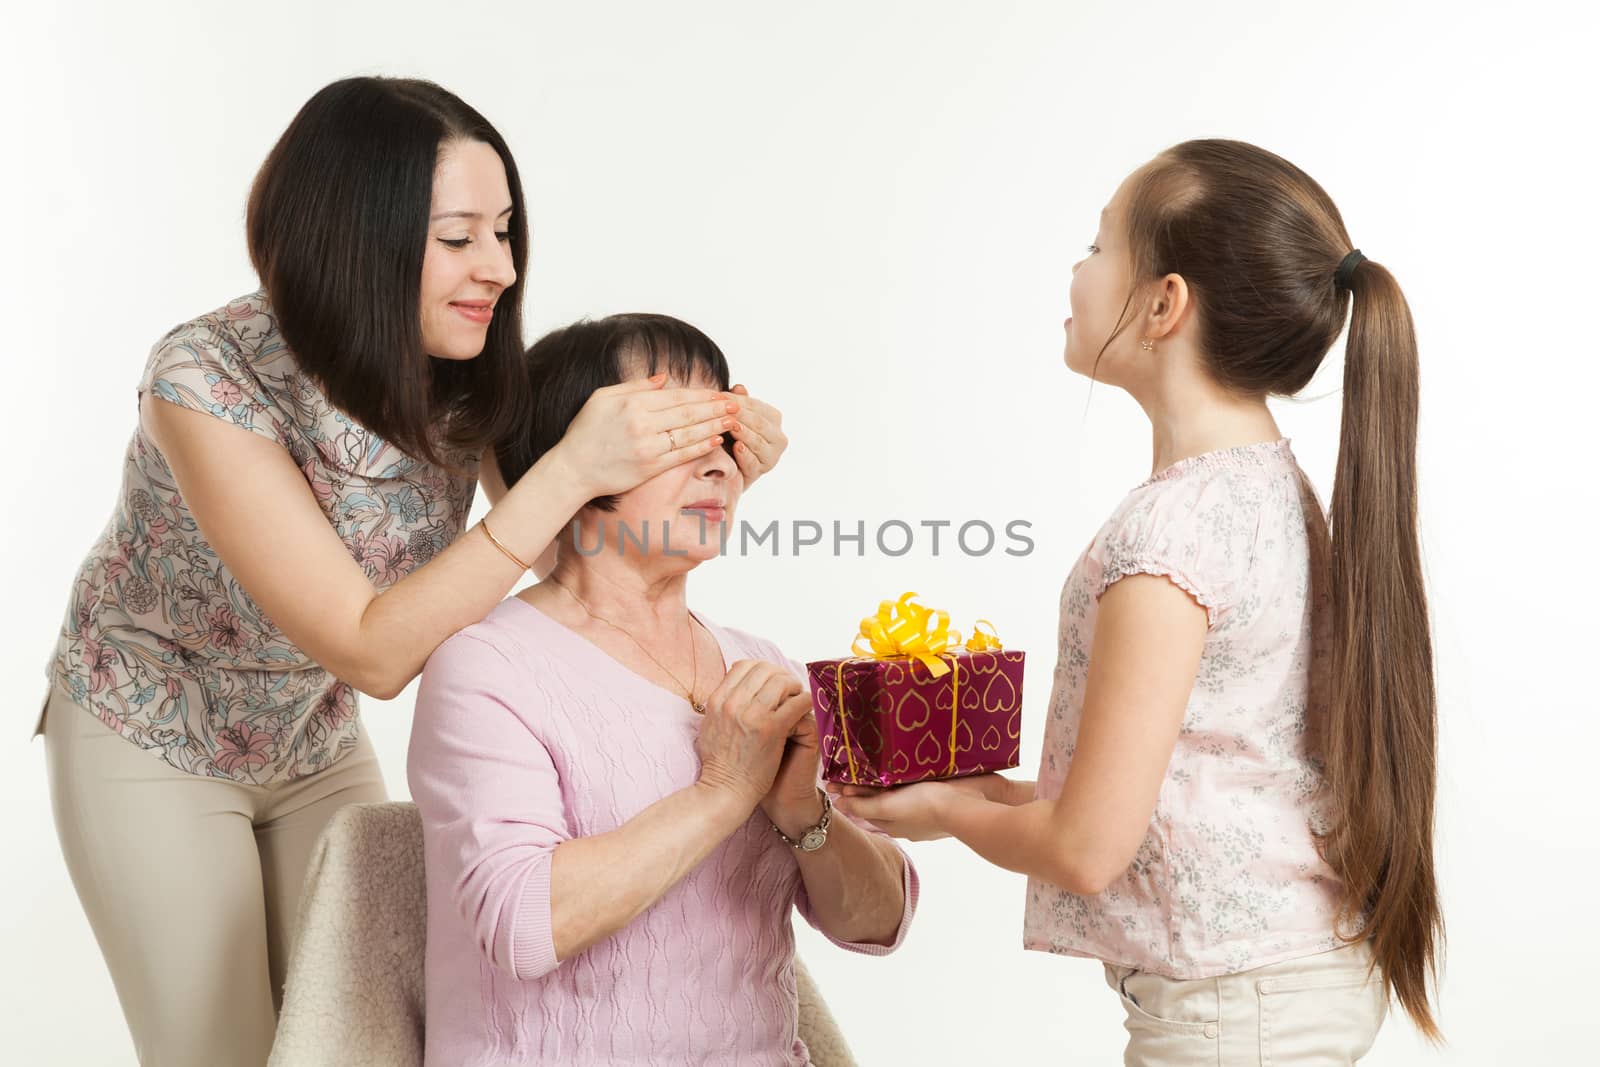 the daughter and the granddaughter give a gift to the grandmother